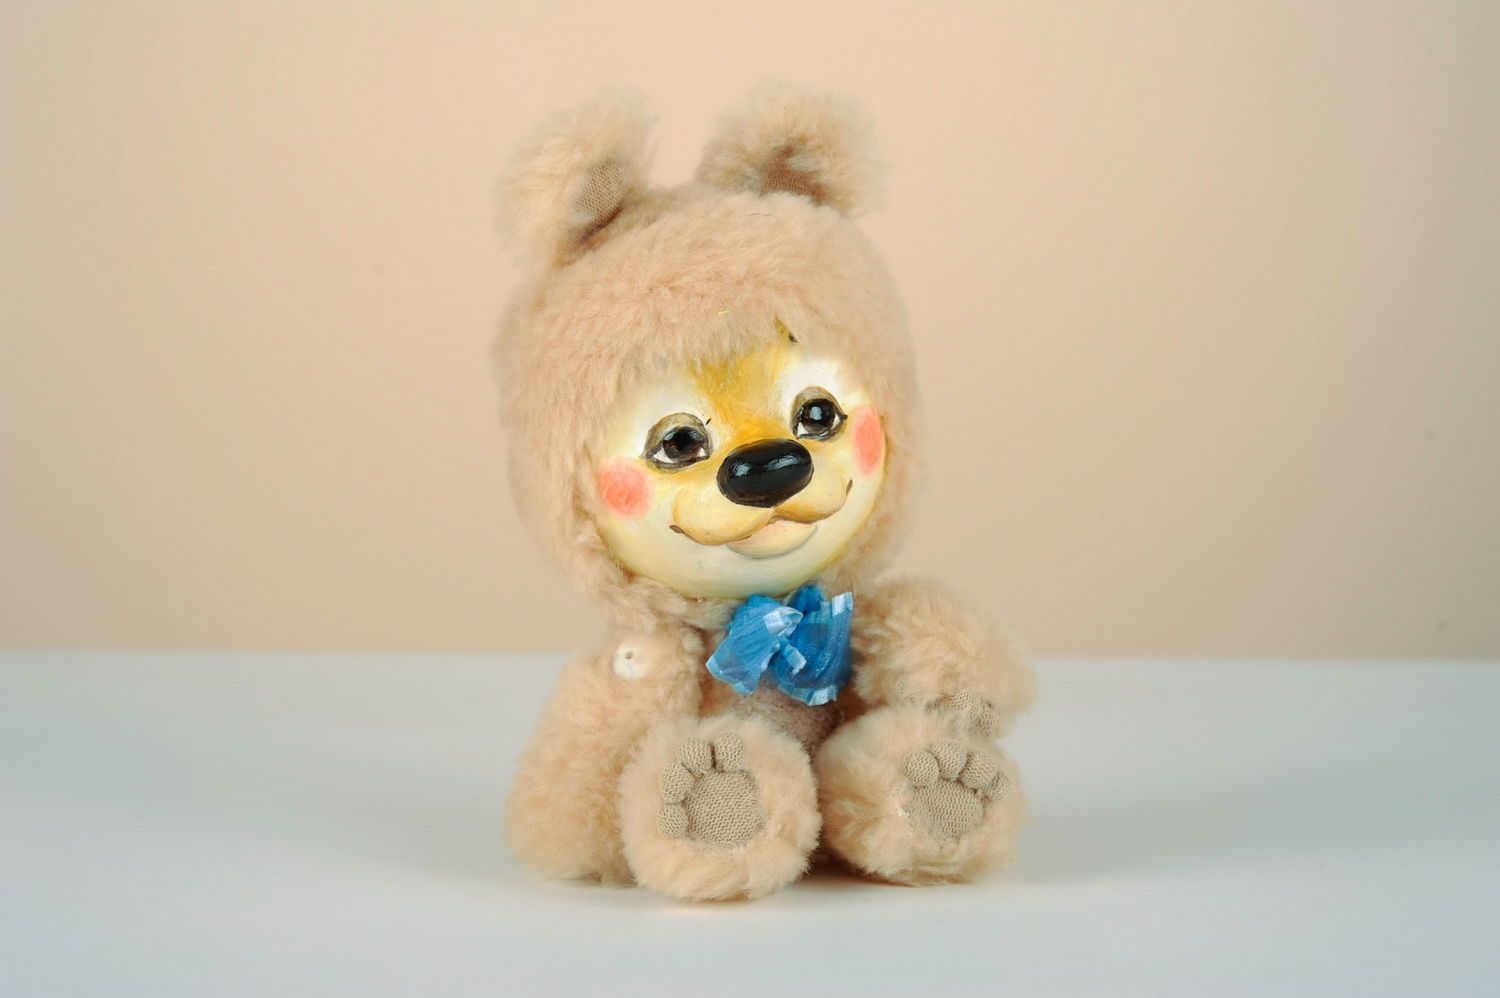 Toy made of papier-mache Baby bear photo 3